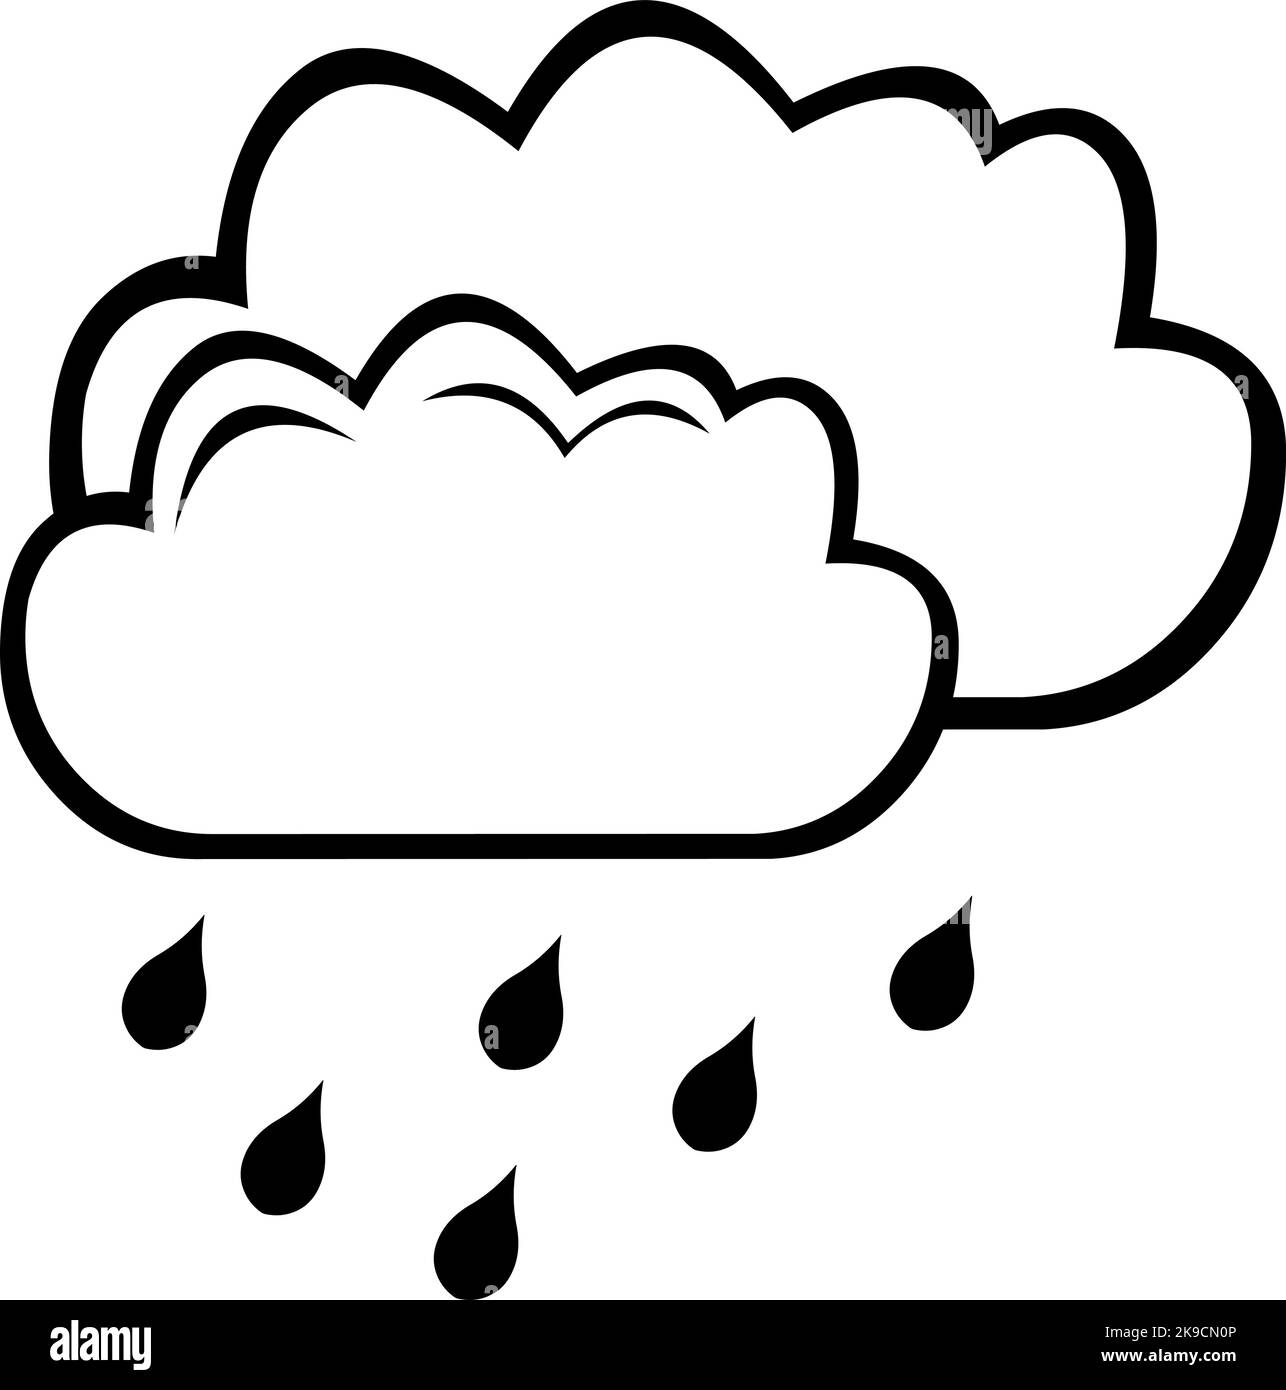 Vector illustration of clouds icon with raindrops drawn in black and white Stock Vector